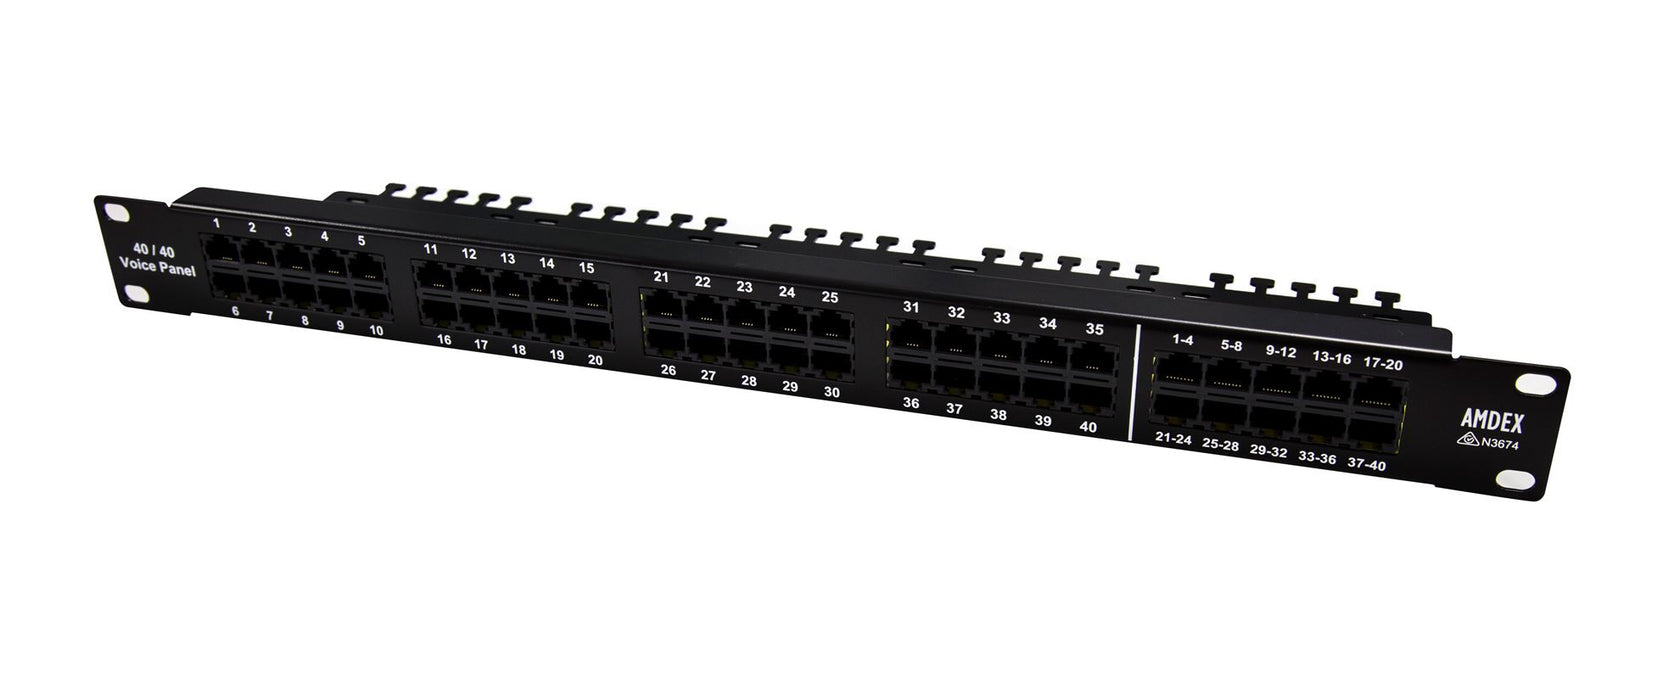 AMDEX 40 Port Breakout Voice Patch Panel for use with the NEC UNIVERGE Phone Sys